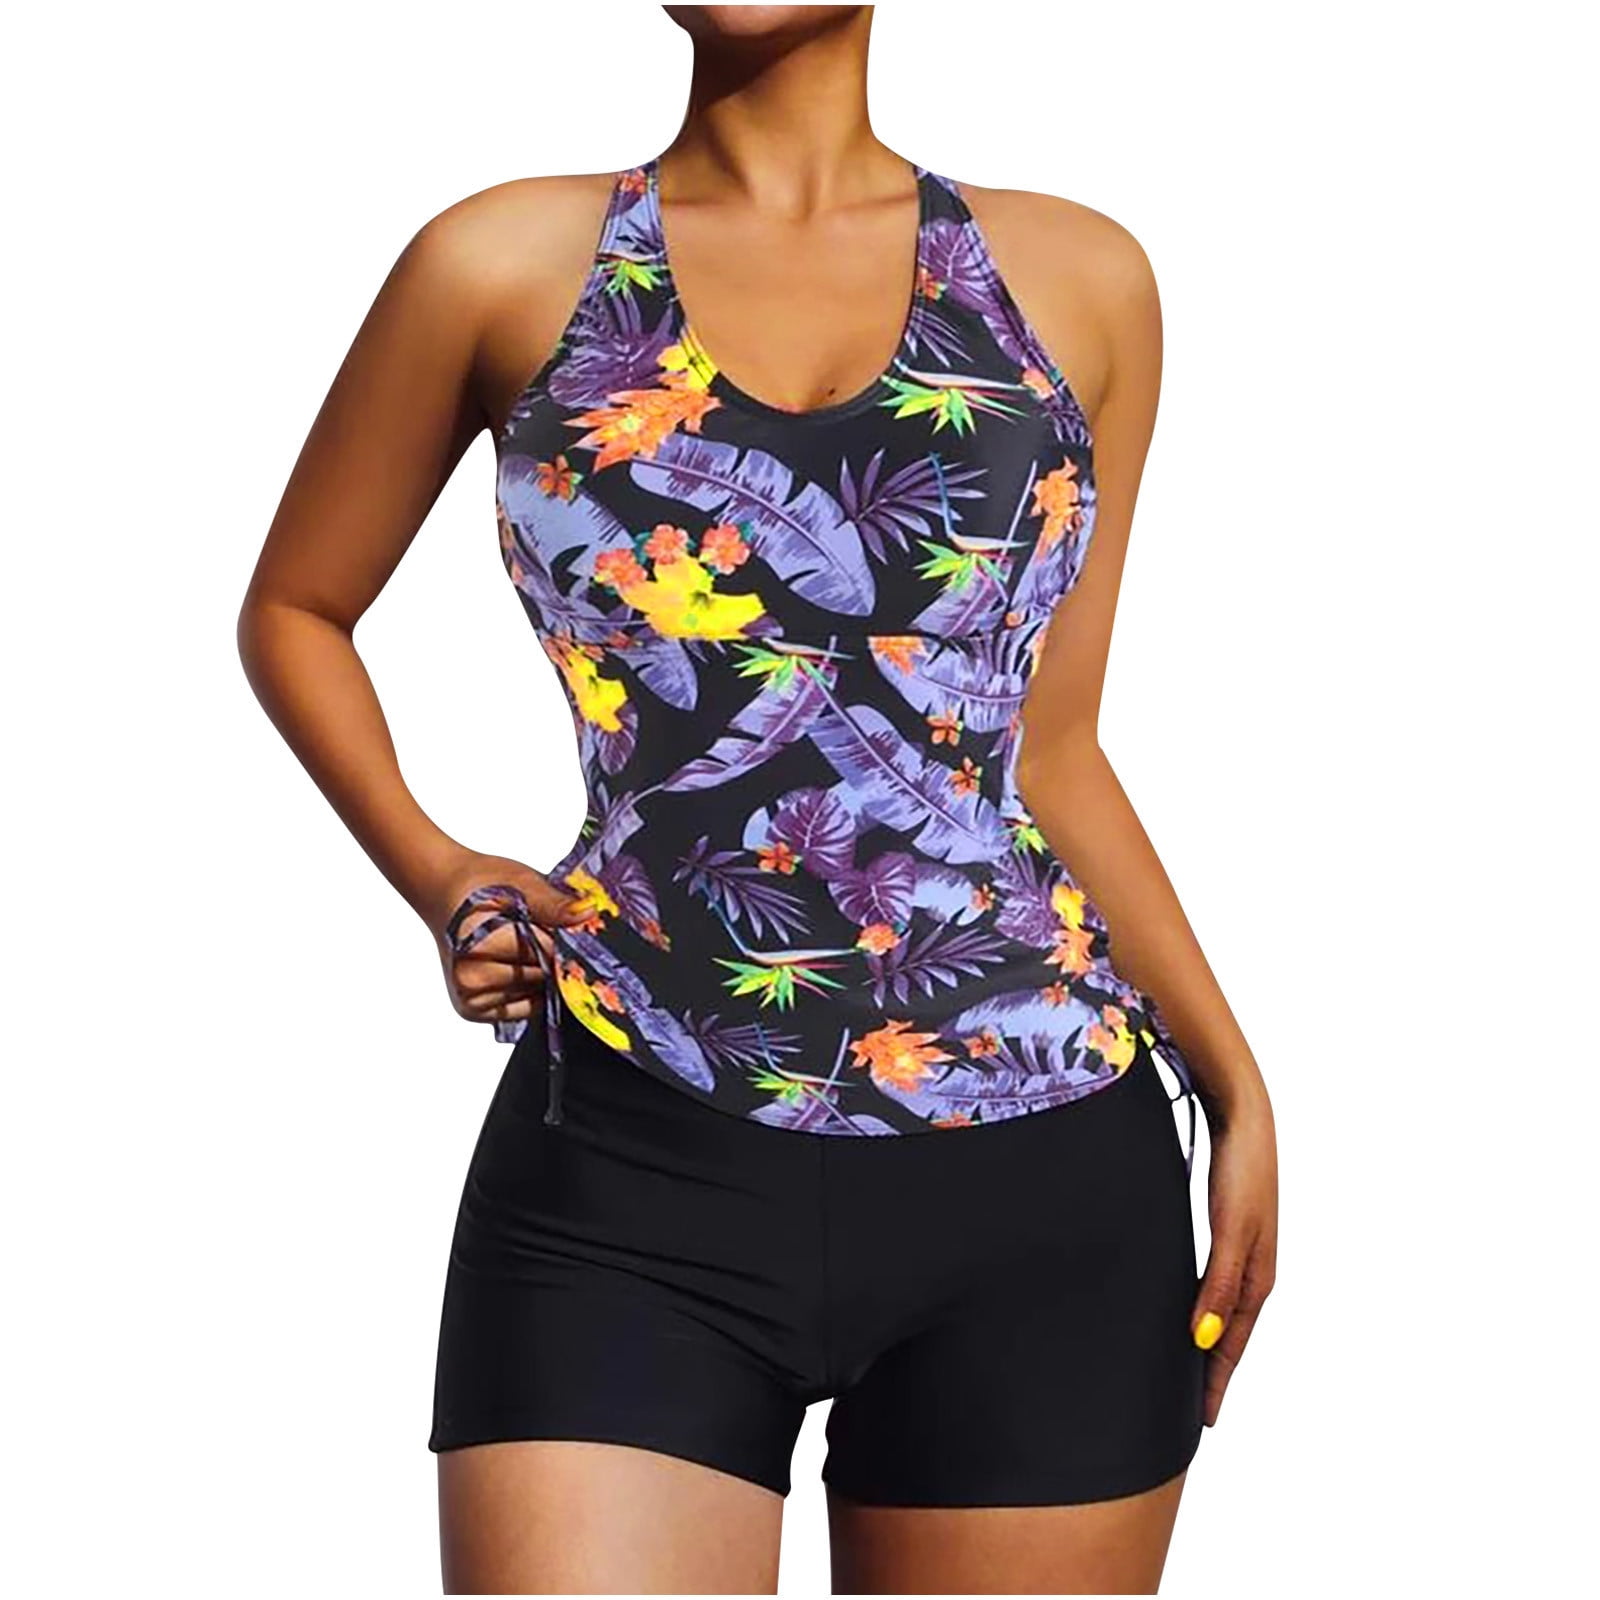 ZQGJB Modest Tankini Set Women's Swimsuit With Bra Without Steel Support  Bikini Multi-color Floral Printed Swimsuit with Shorts Split Two Piece  Swimwear(Purple,M) 